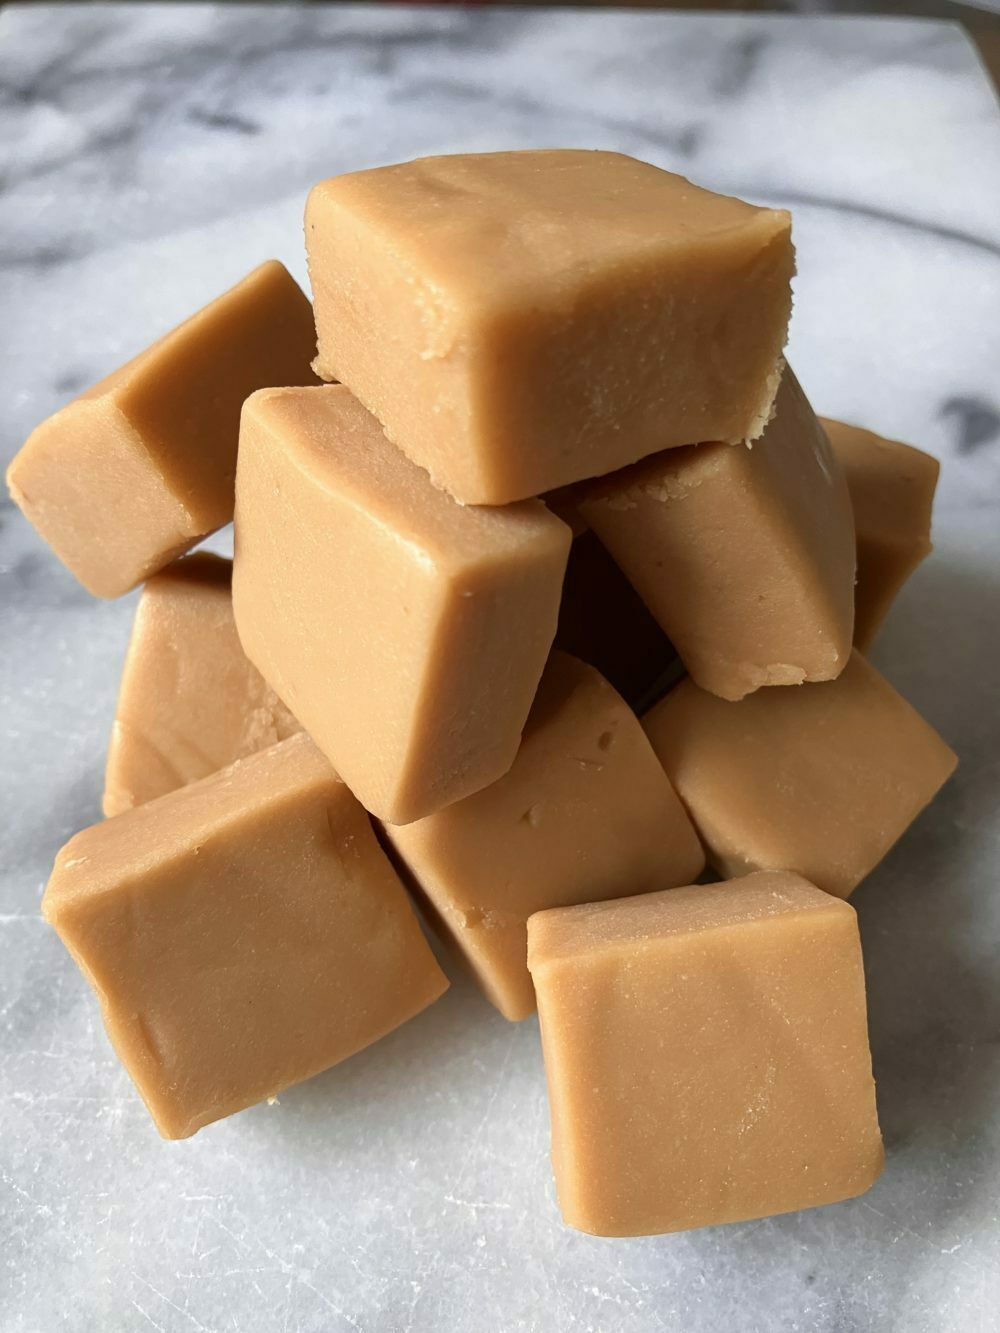 Piles of fudge in a cube on a marbled background.